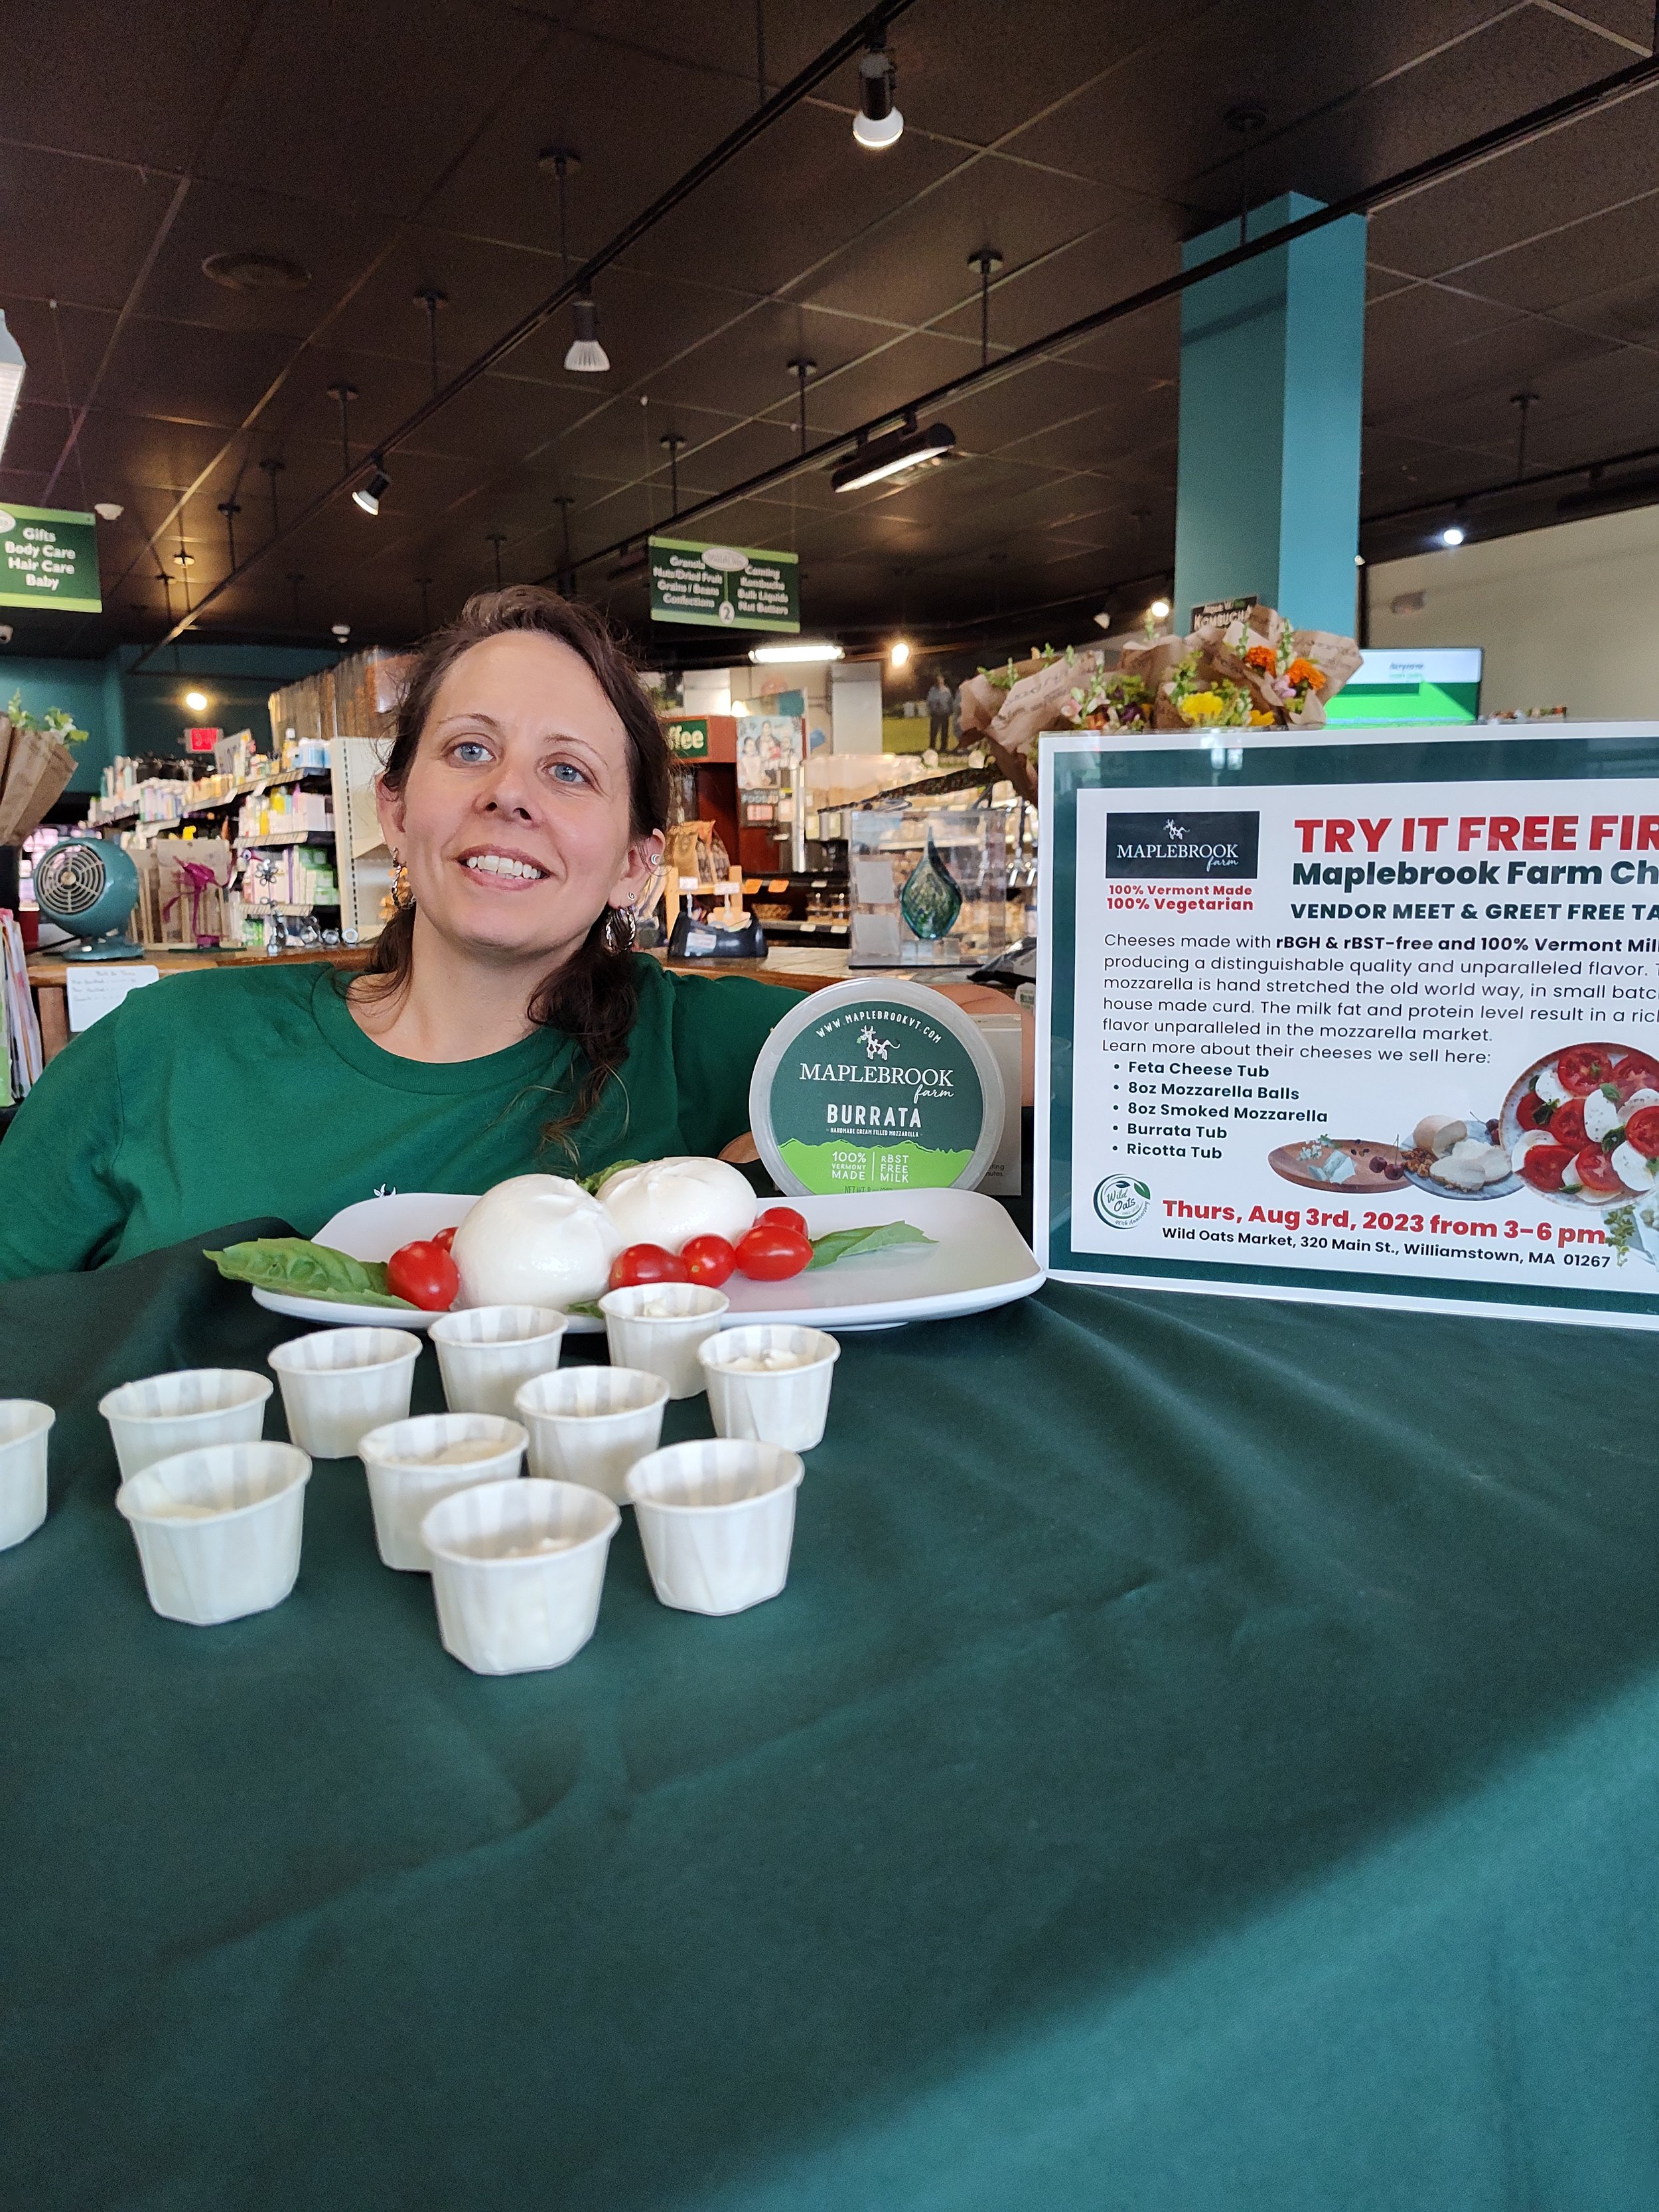 Thank you Maplebrook Farm for meeting and giving samples to our guests at Wild Oats Market  (8).jpg